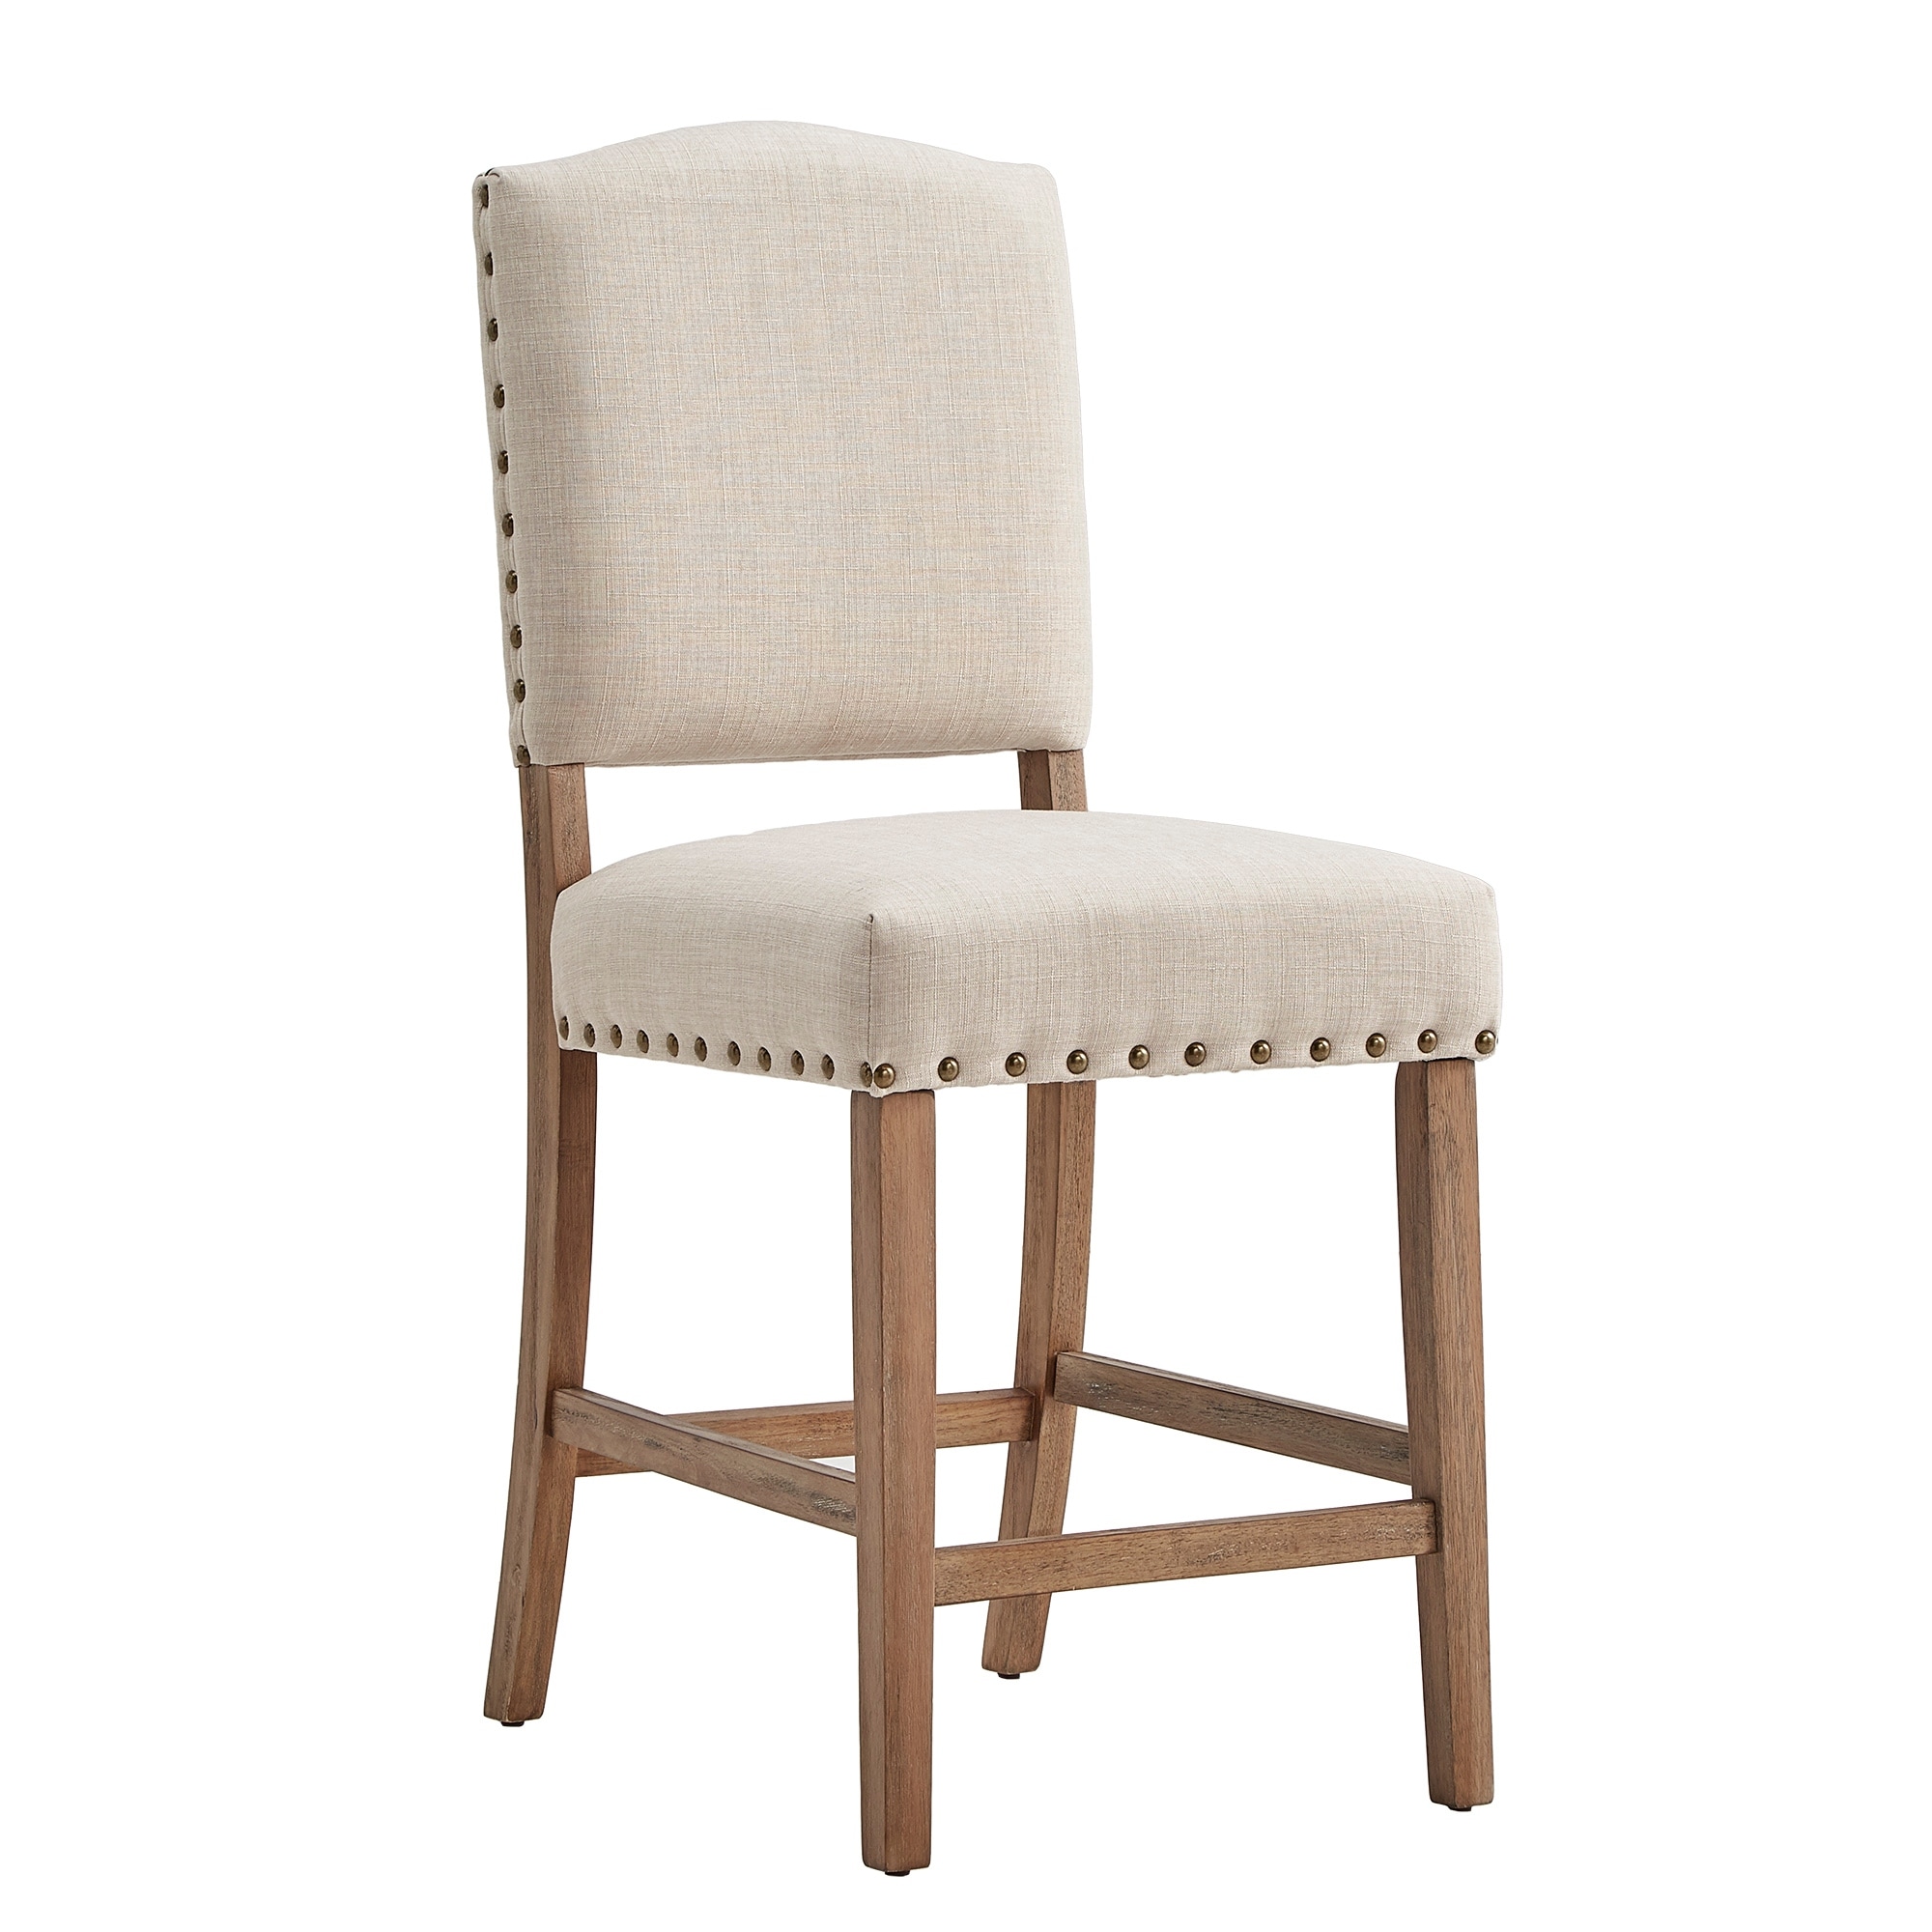 Benchwright Premium Nailhead Upholstered Counter Height Chairs (set Of 2) By Inspire Q Artisan